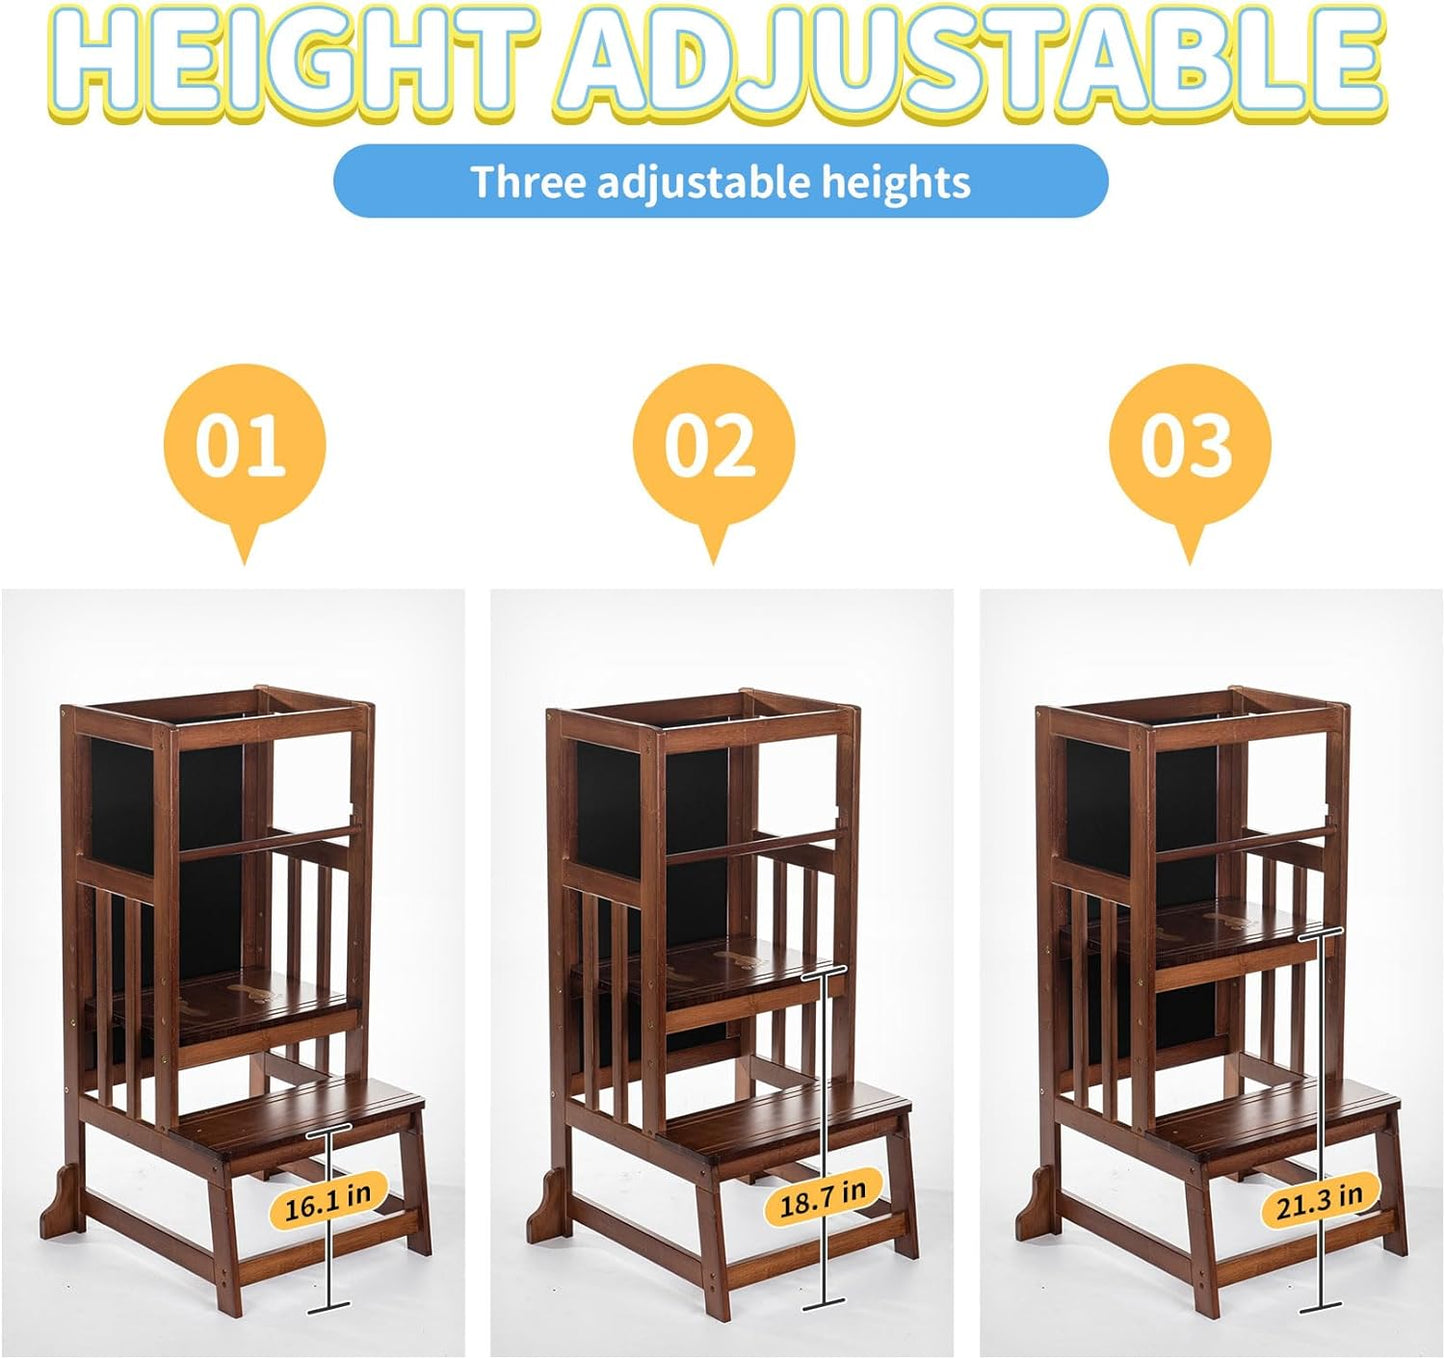 UNICOO Bamboo Adjustable Height Kids Learning Step Stool, Toddler Kitchen Standing Tower, Montessori Style Kitchen Step Stool with Double-Side Art Board for Creative Play (D057)